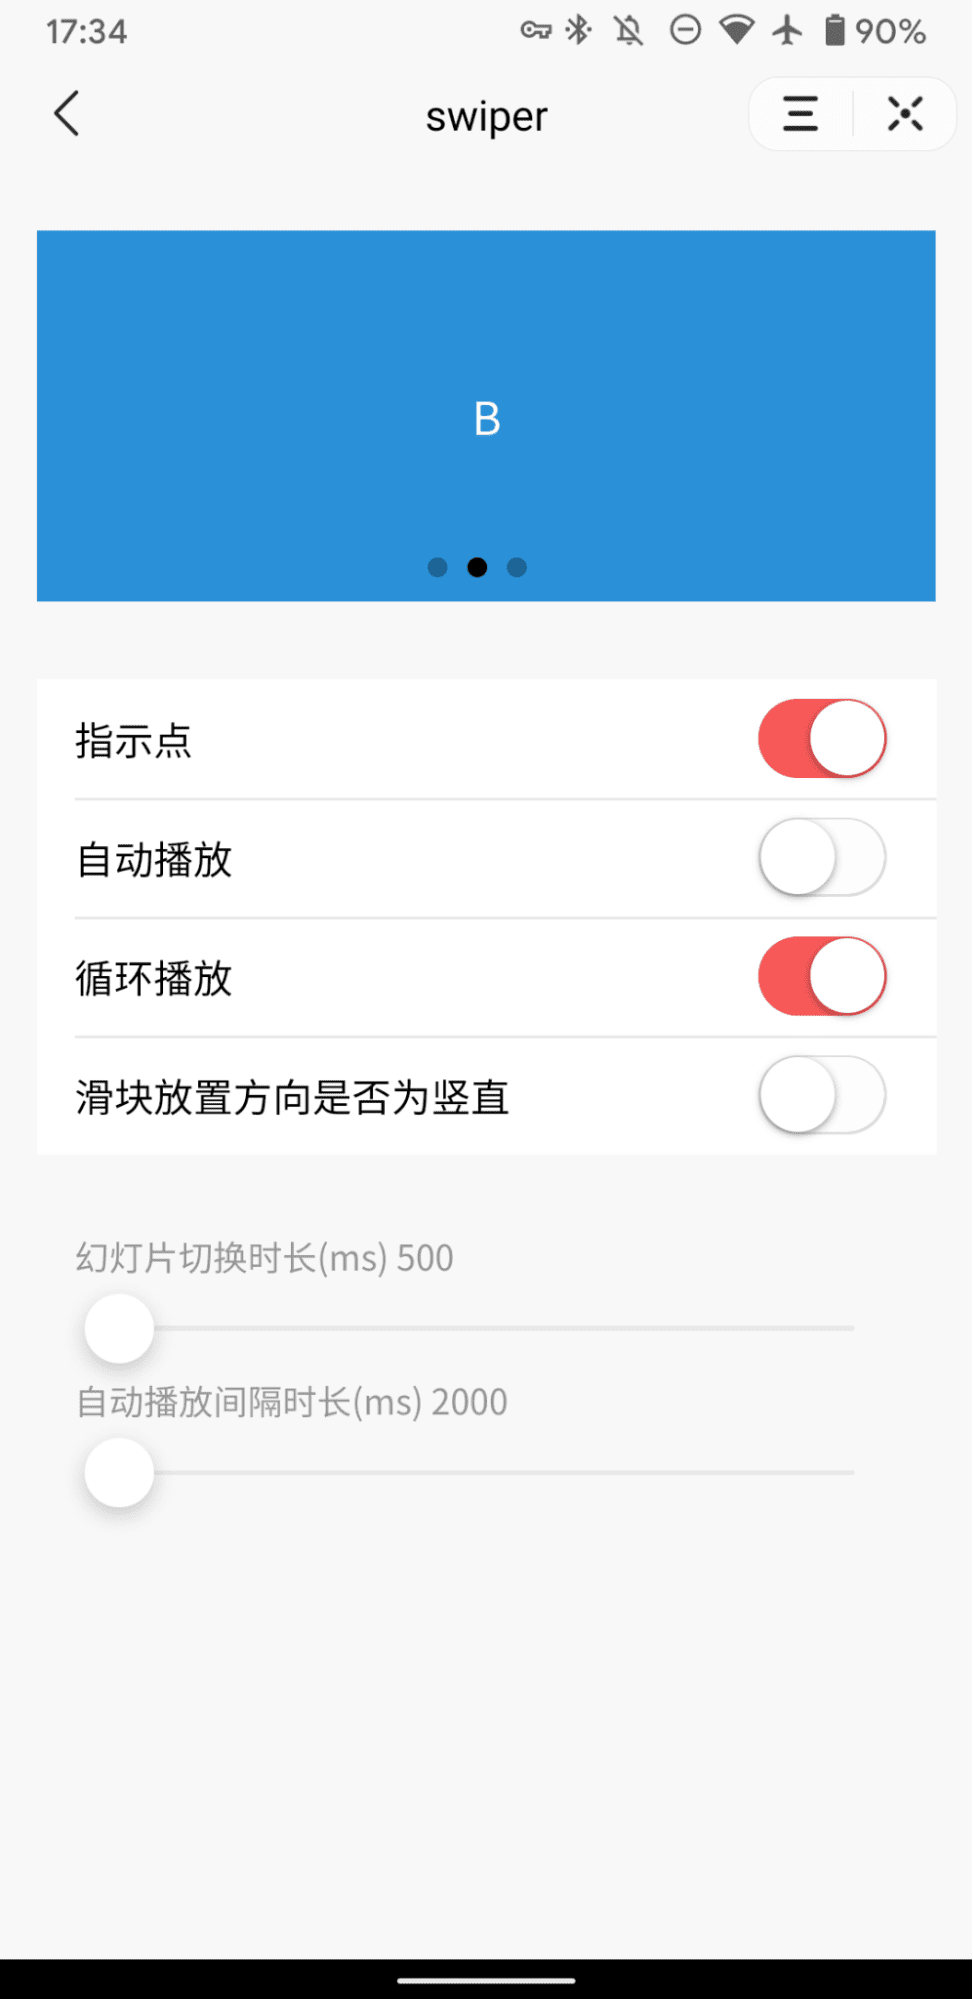 The Douyin demo mini app showcasing the Douyin slider (carousel) component with toggles for auto-advance, dot indicators, etc.